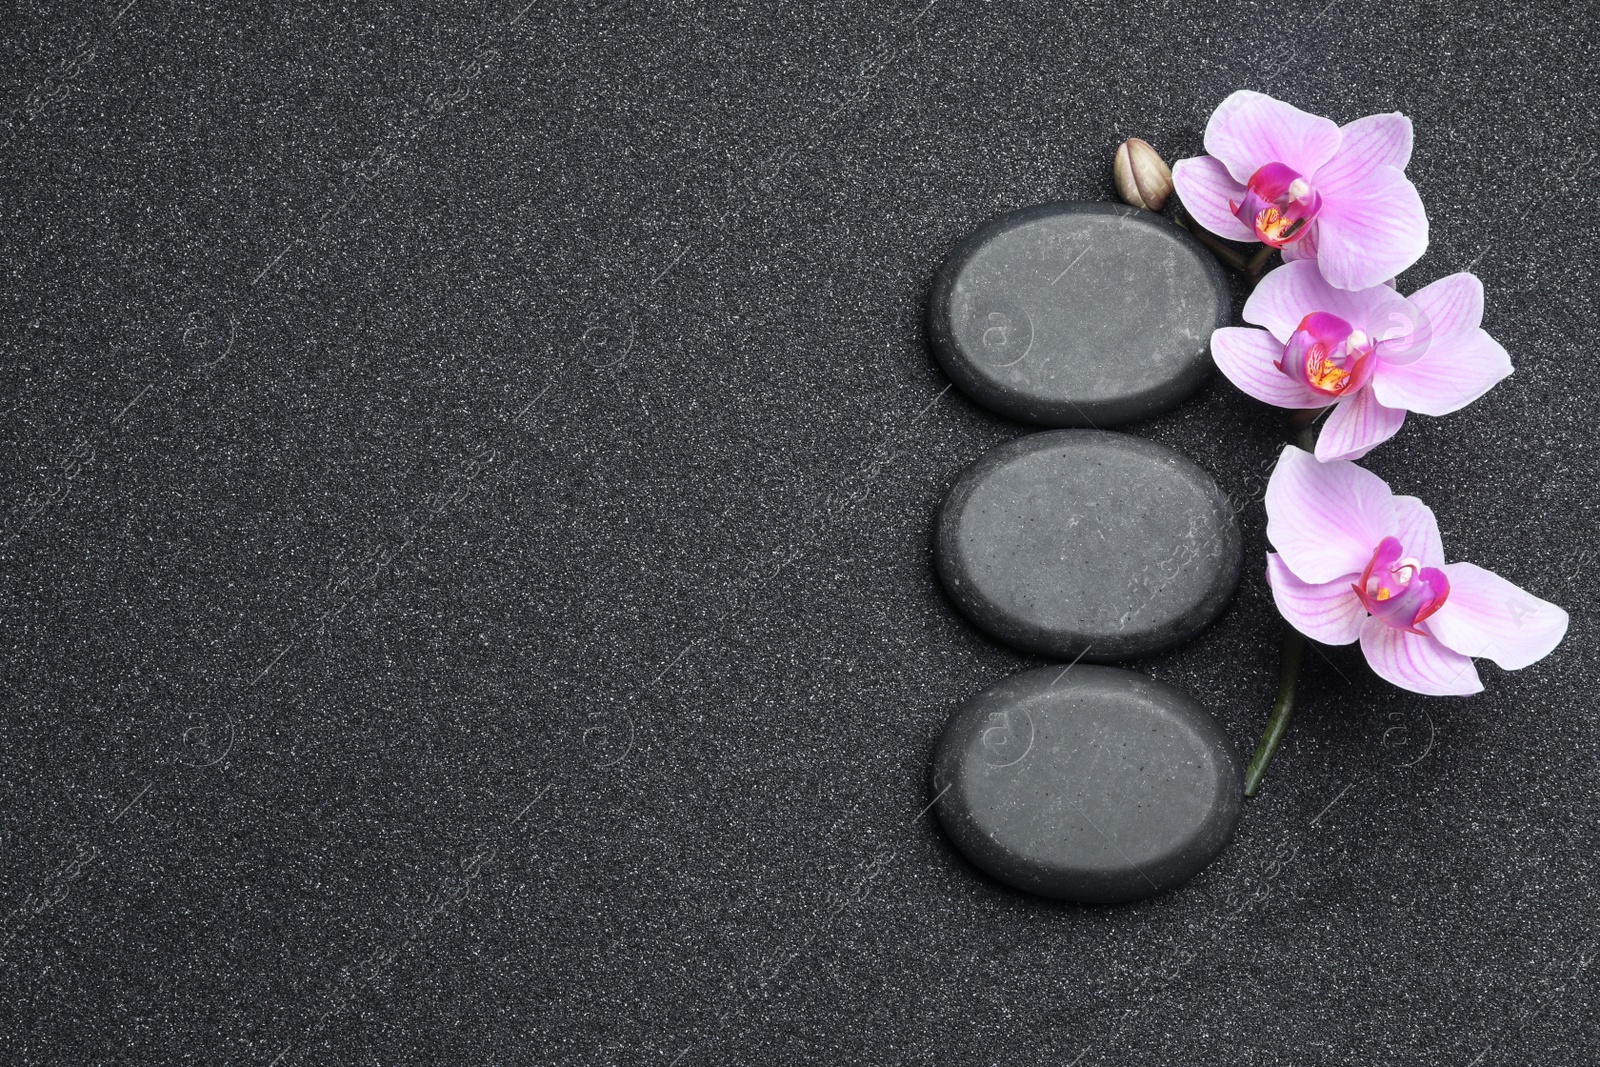 Photo of Flat lay composition with stones and orchid flowers on black sand, space for text. Zen concept